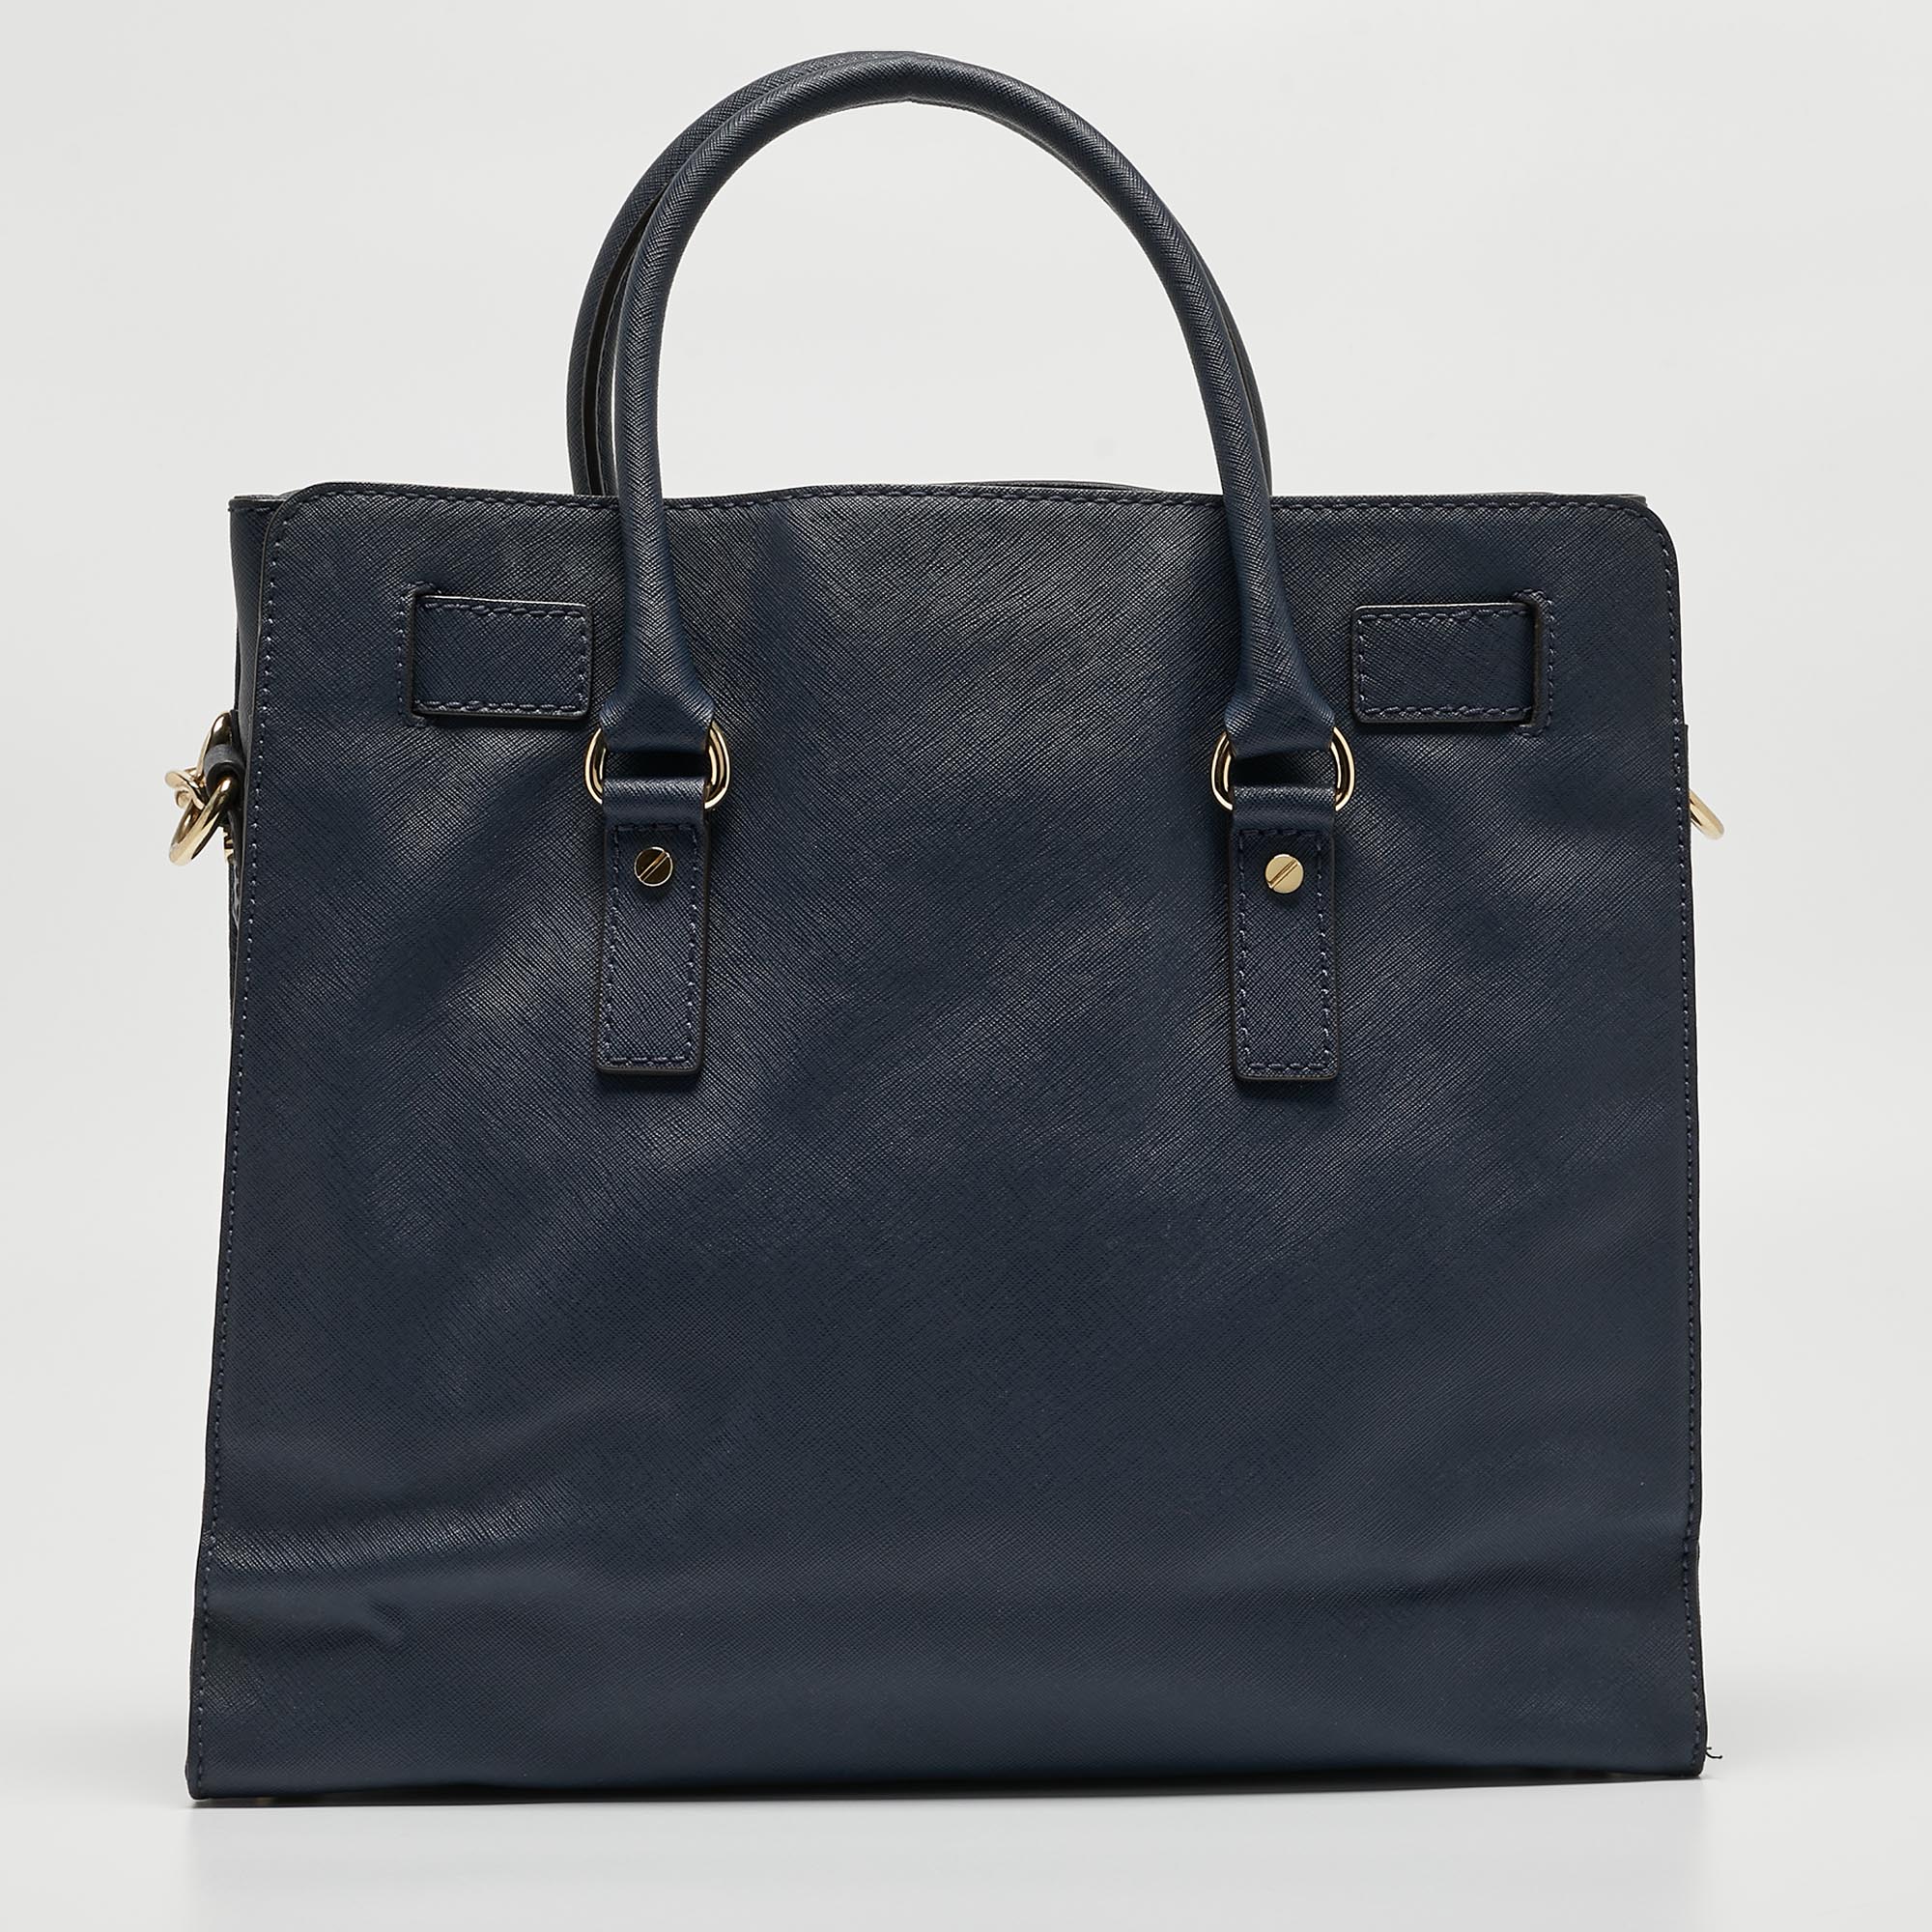 MICHAEL Michael Kors Navy Blue Leather Large Hamilton North South Tote